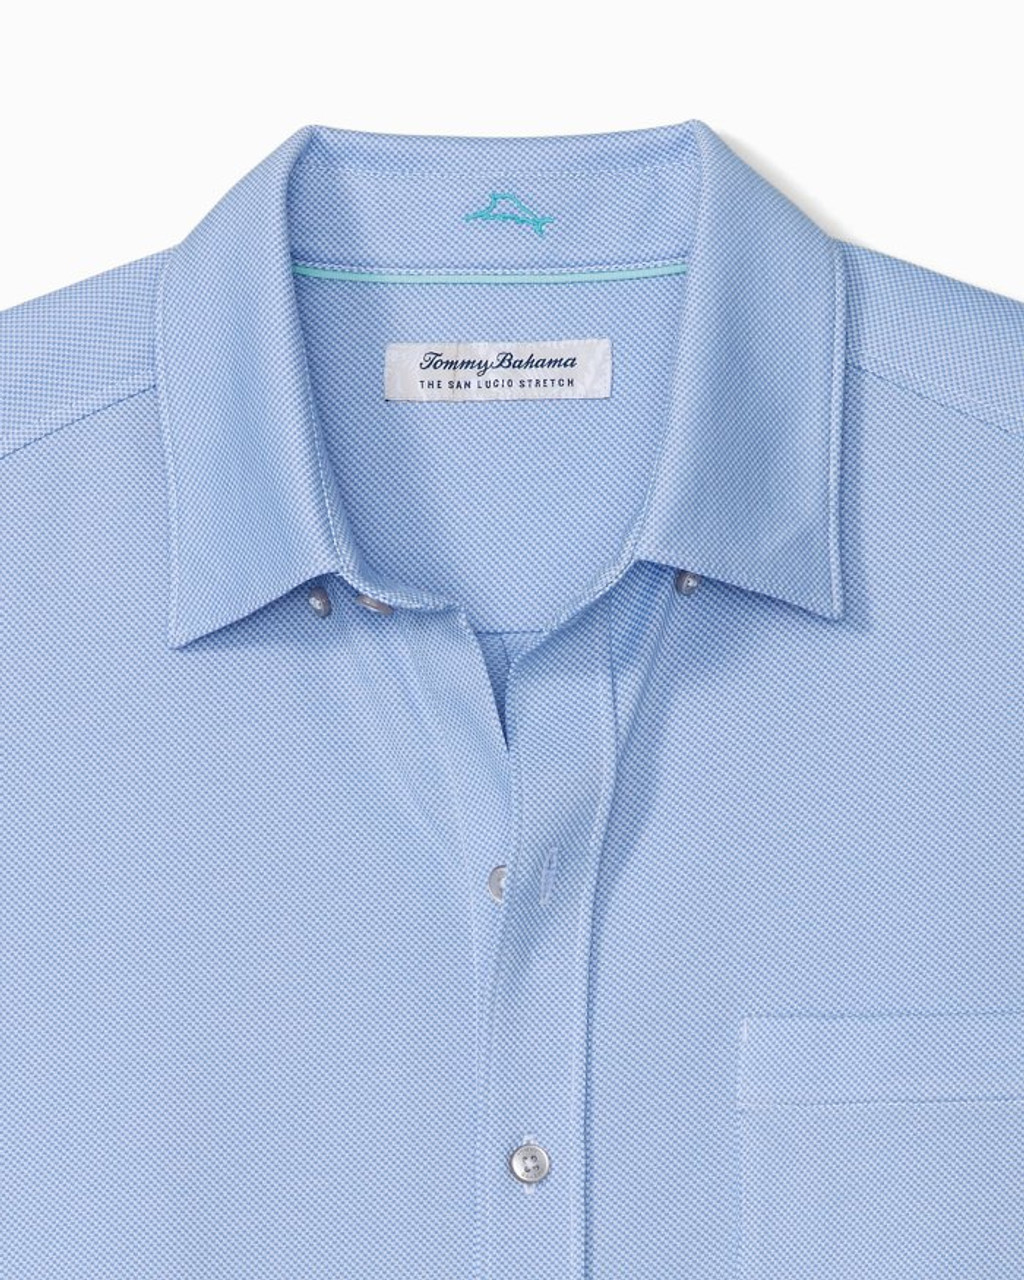 New San Lucio Stretch Long Sleeve Shirt ST226356 - Parts Unknown